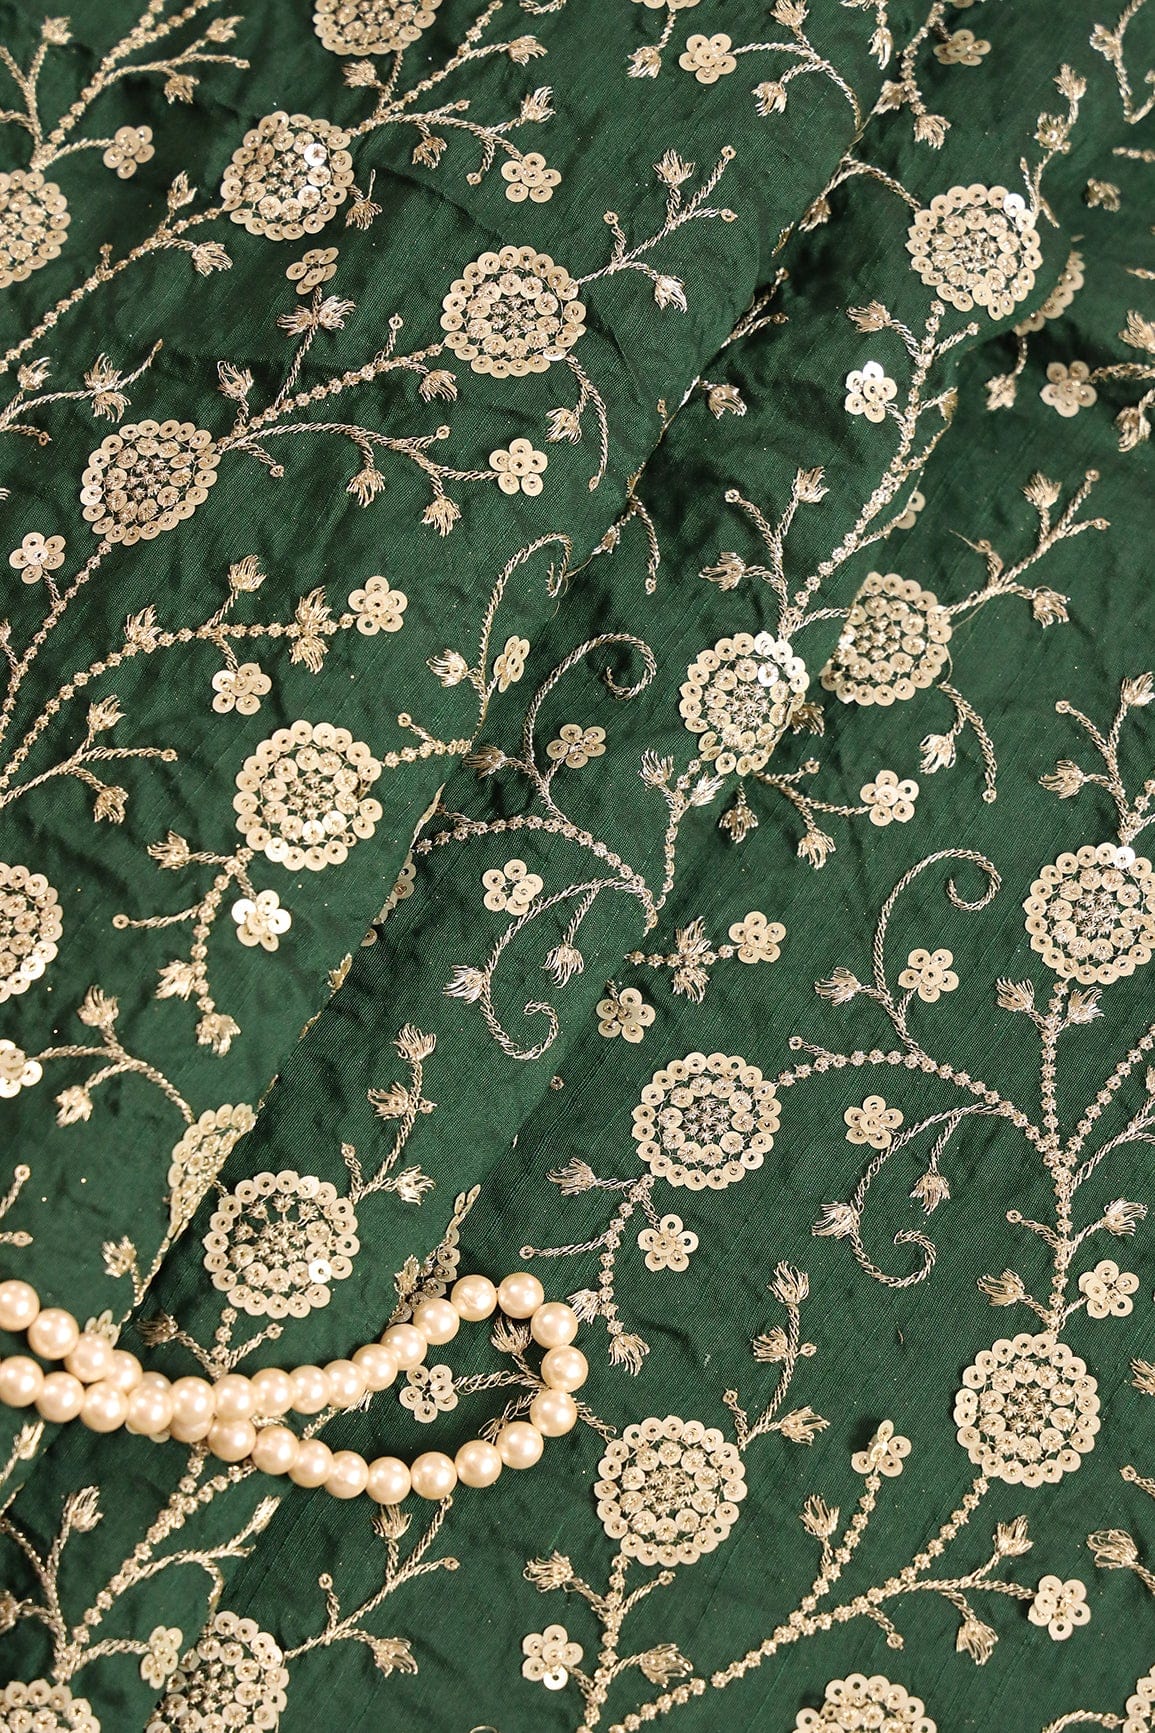 doeraa Embroidery Fabrics Gold Zari With Gold Sequins Beautiful Floral Embroidery Work On Bottle Green Raw Silk Fabric